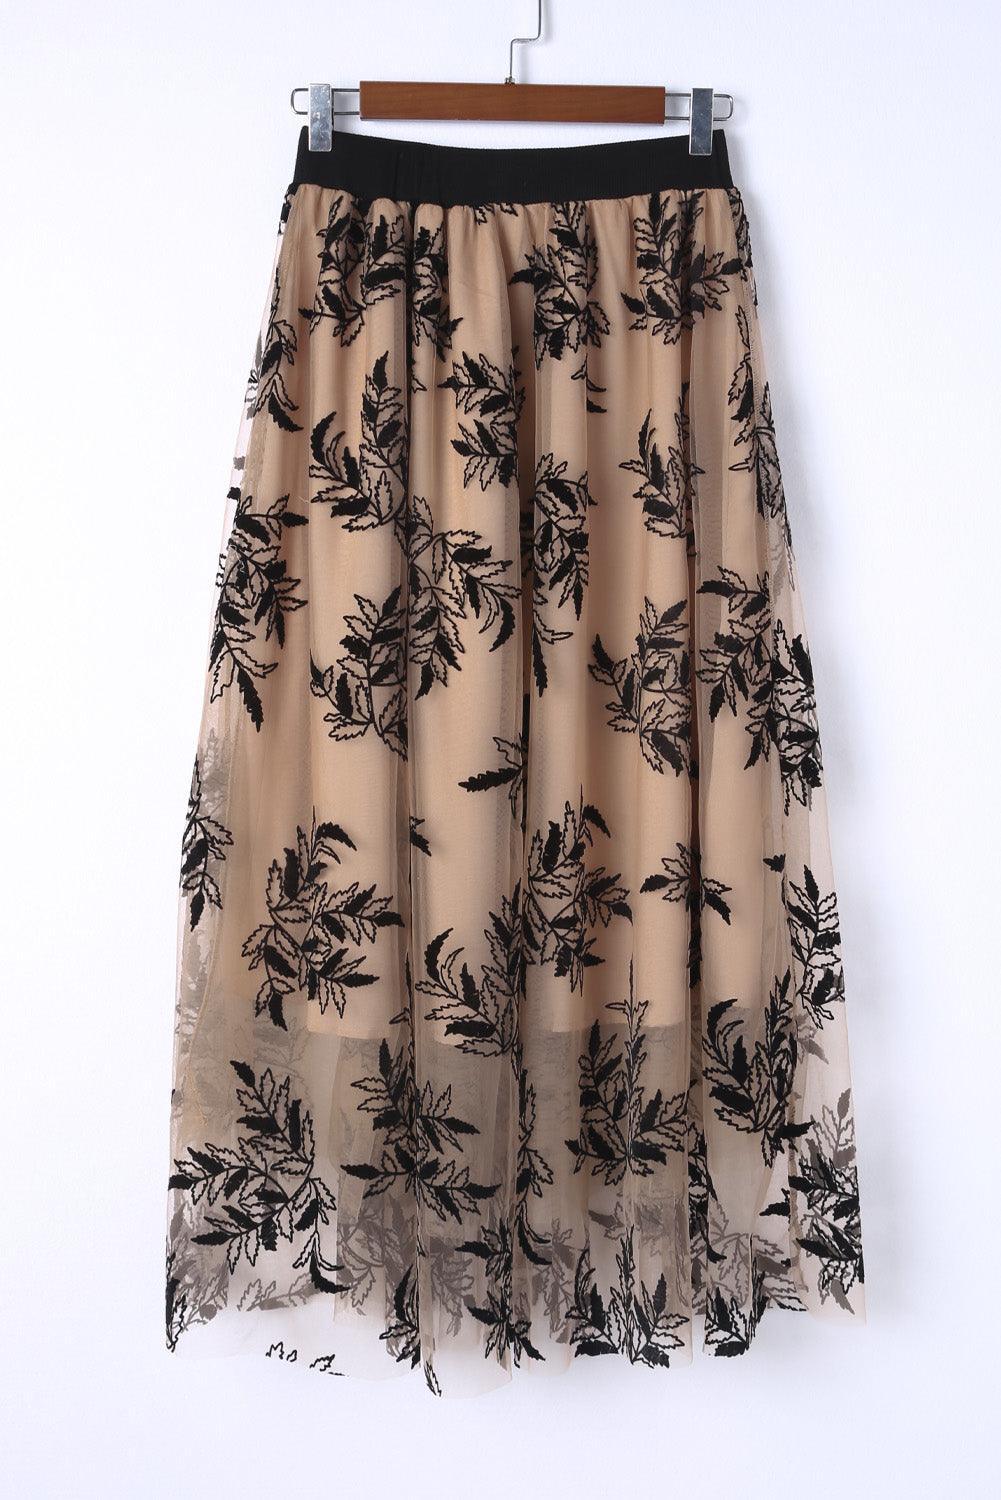 Apricot Floral Leaves Embroidered High Waist Maxi Skirt - Ninonine